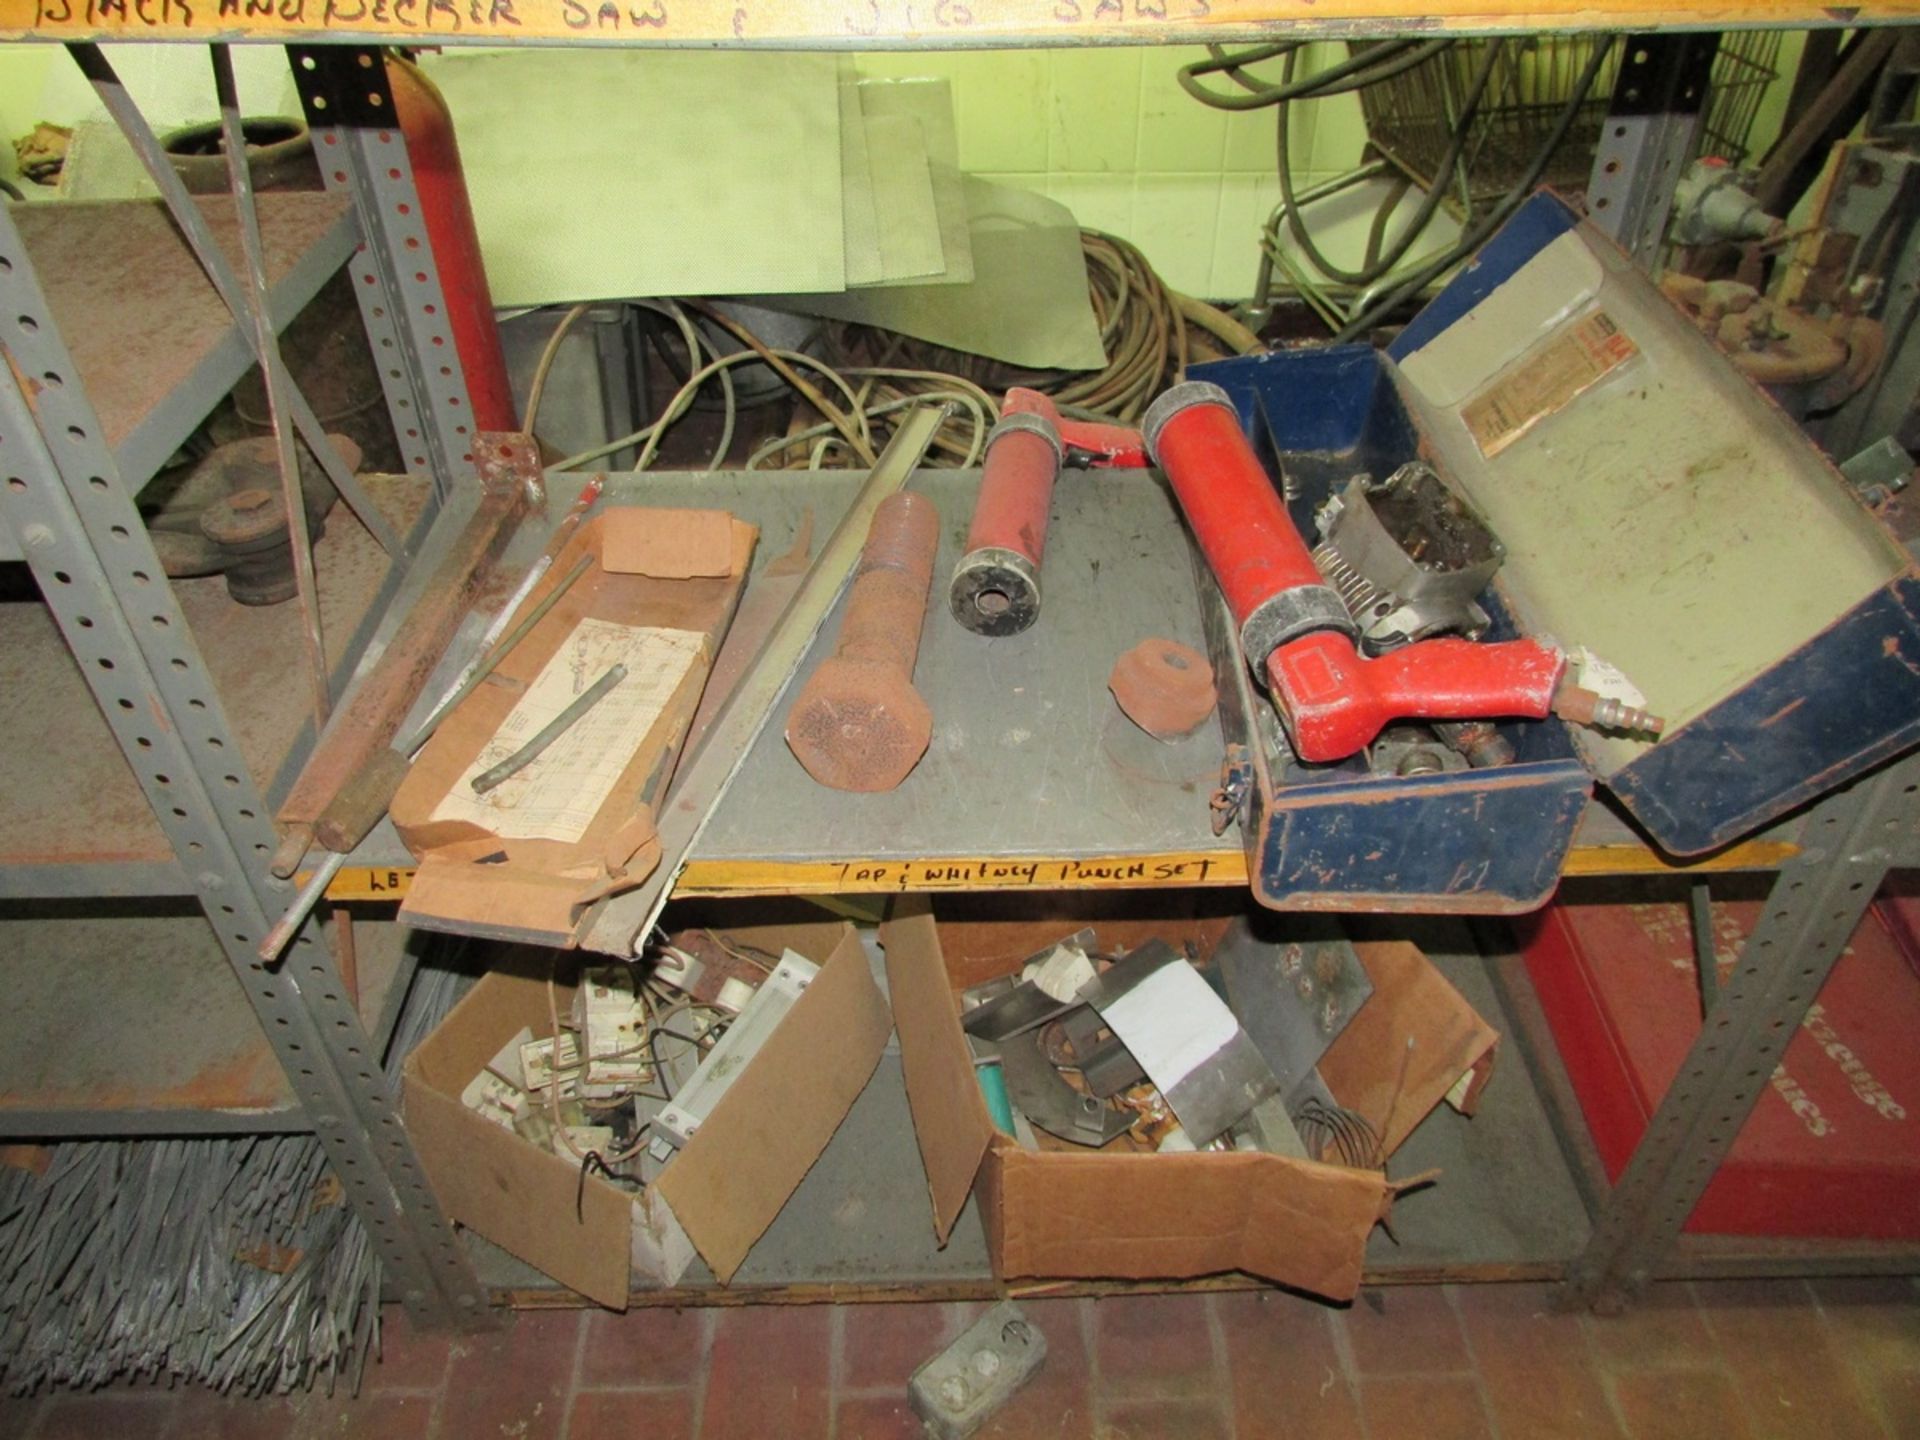 Contents of Tool Room, To Include Adjustable Shelving Units, Assorted Hand Tools, Pipe Wrenches, - Image 9 of 32